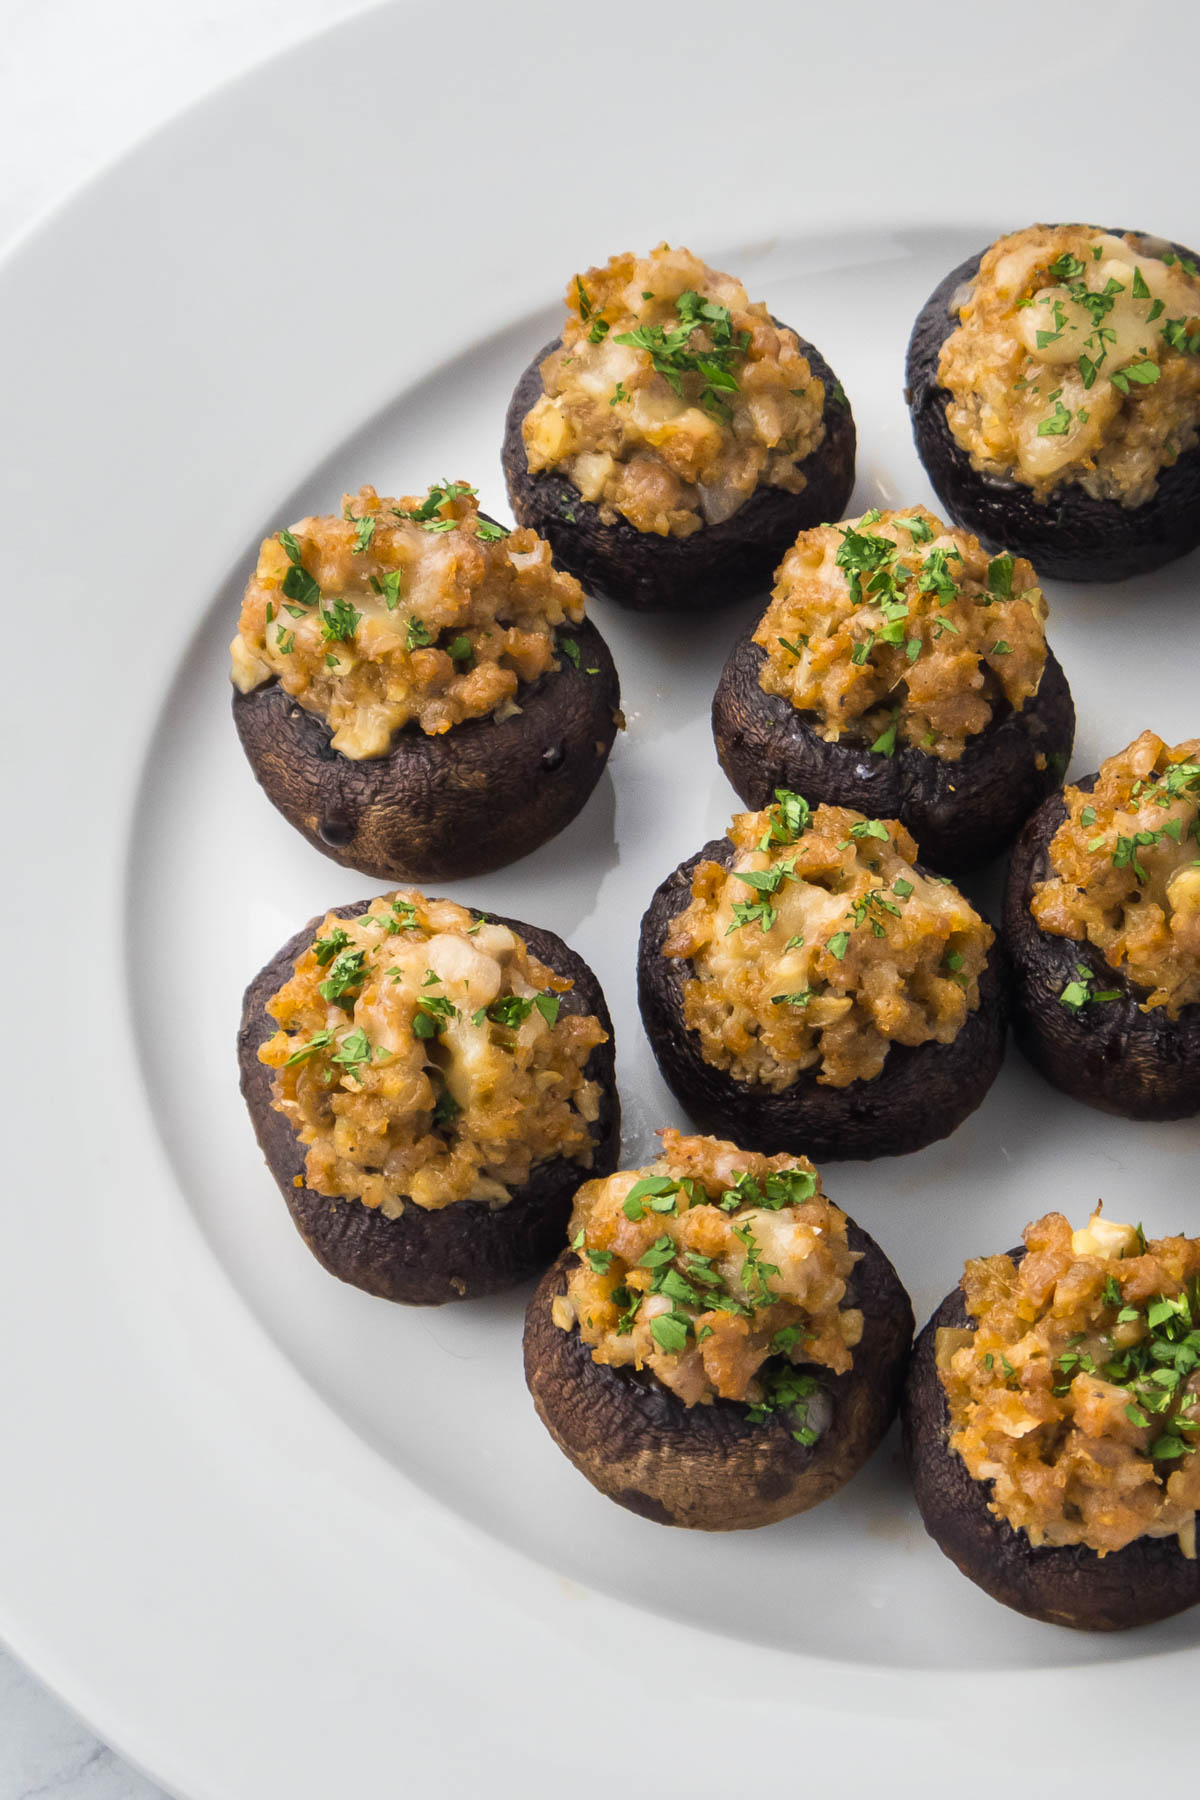 Stuffed mushrooms with sausage and parsley.